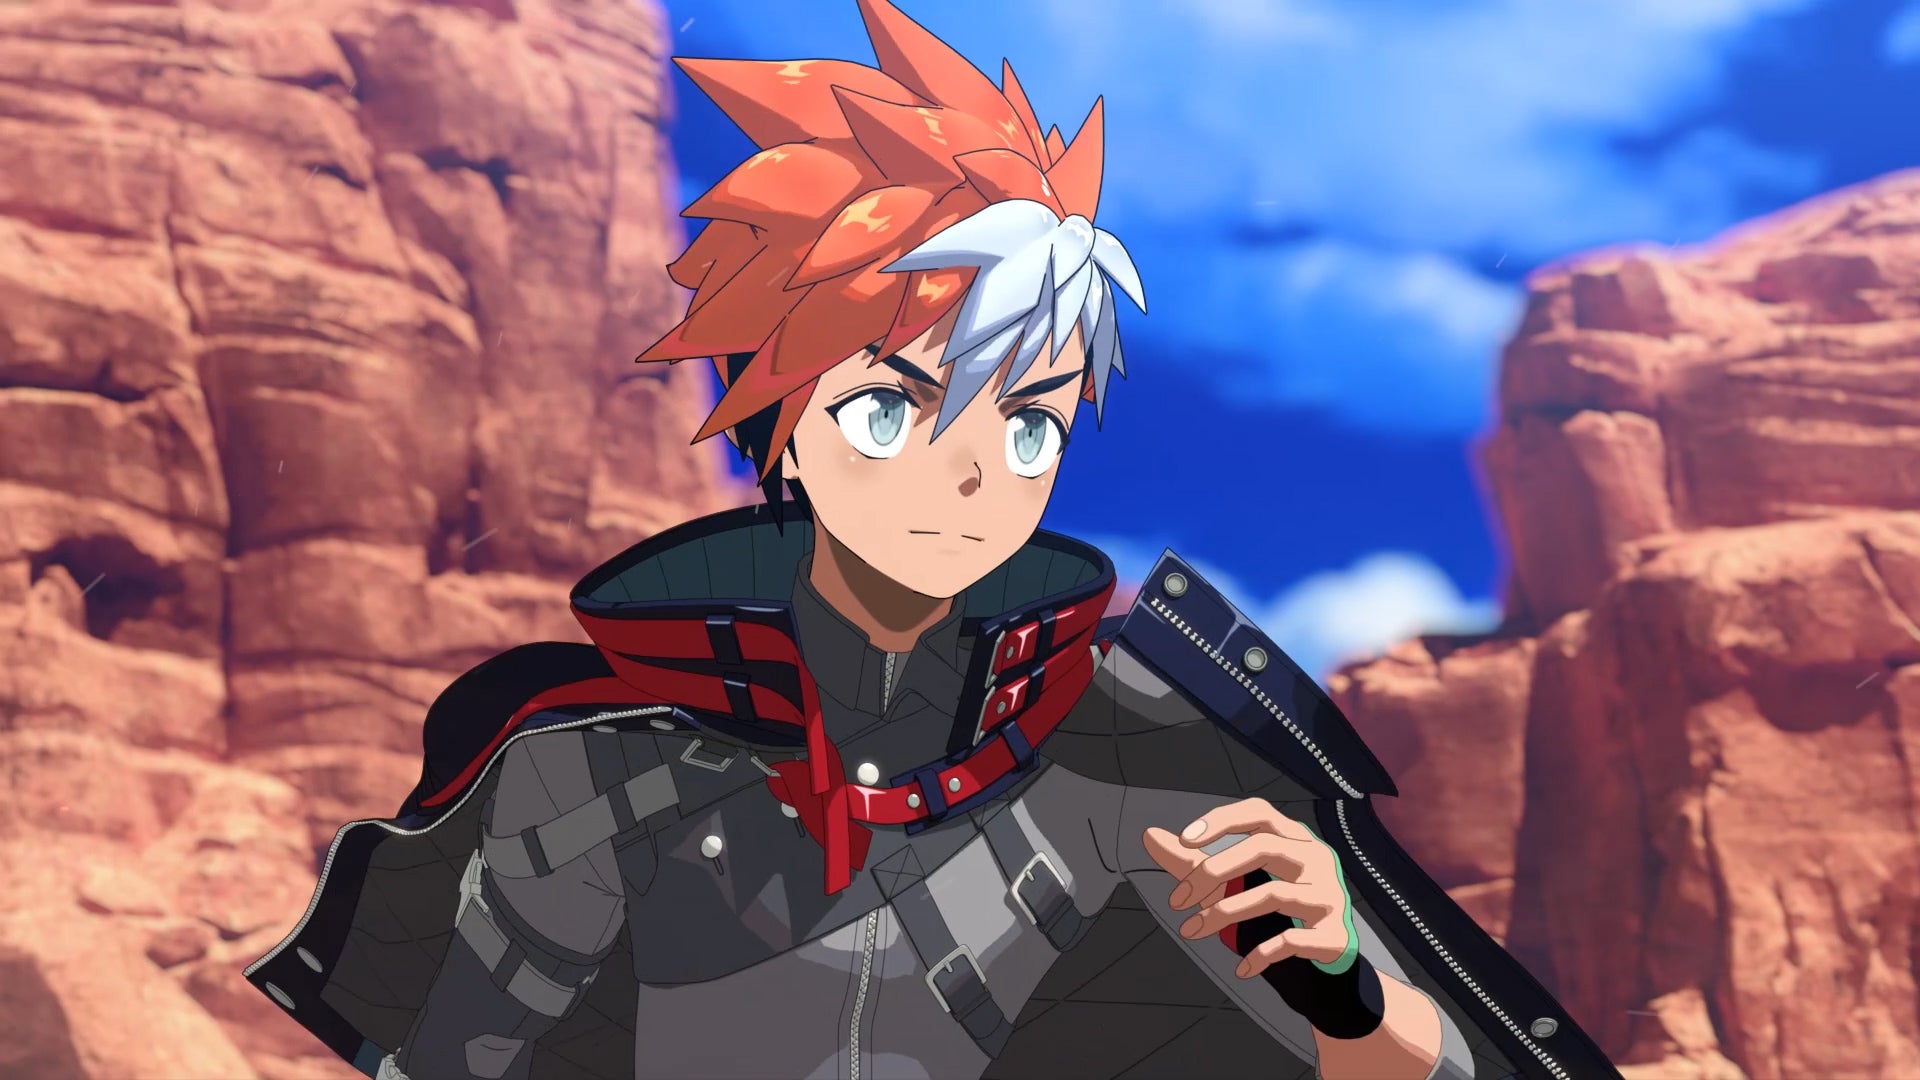 A young boy with red and white hair stands in a canyon in Armed Fantasia